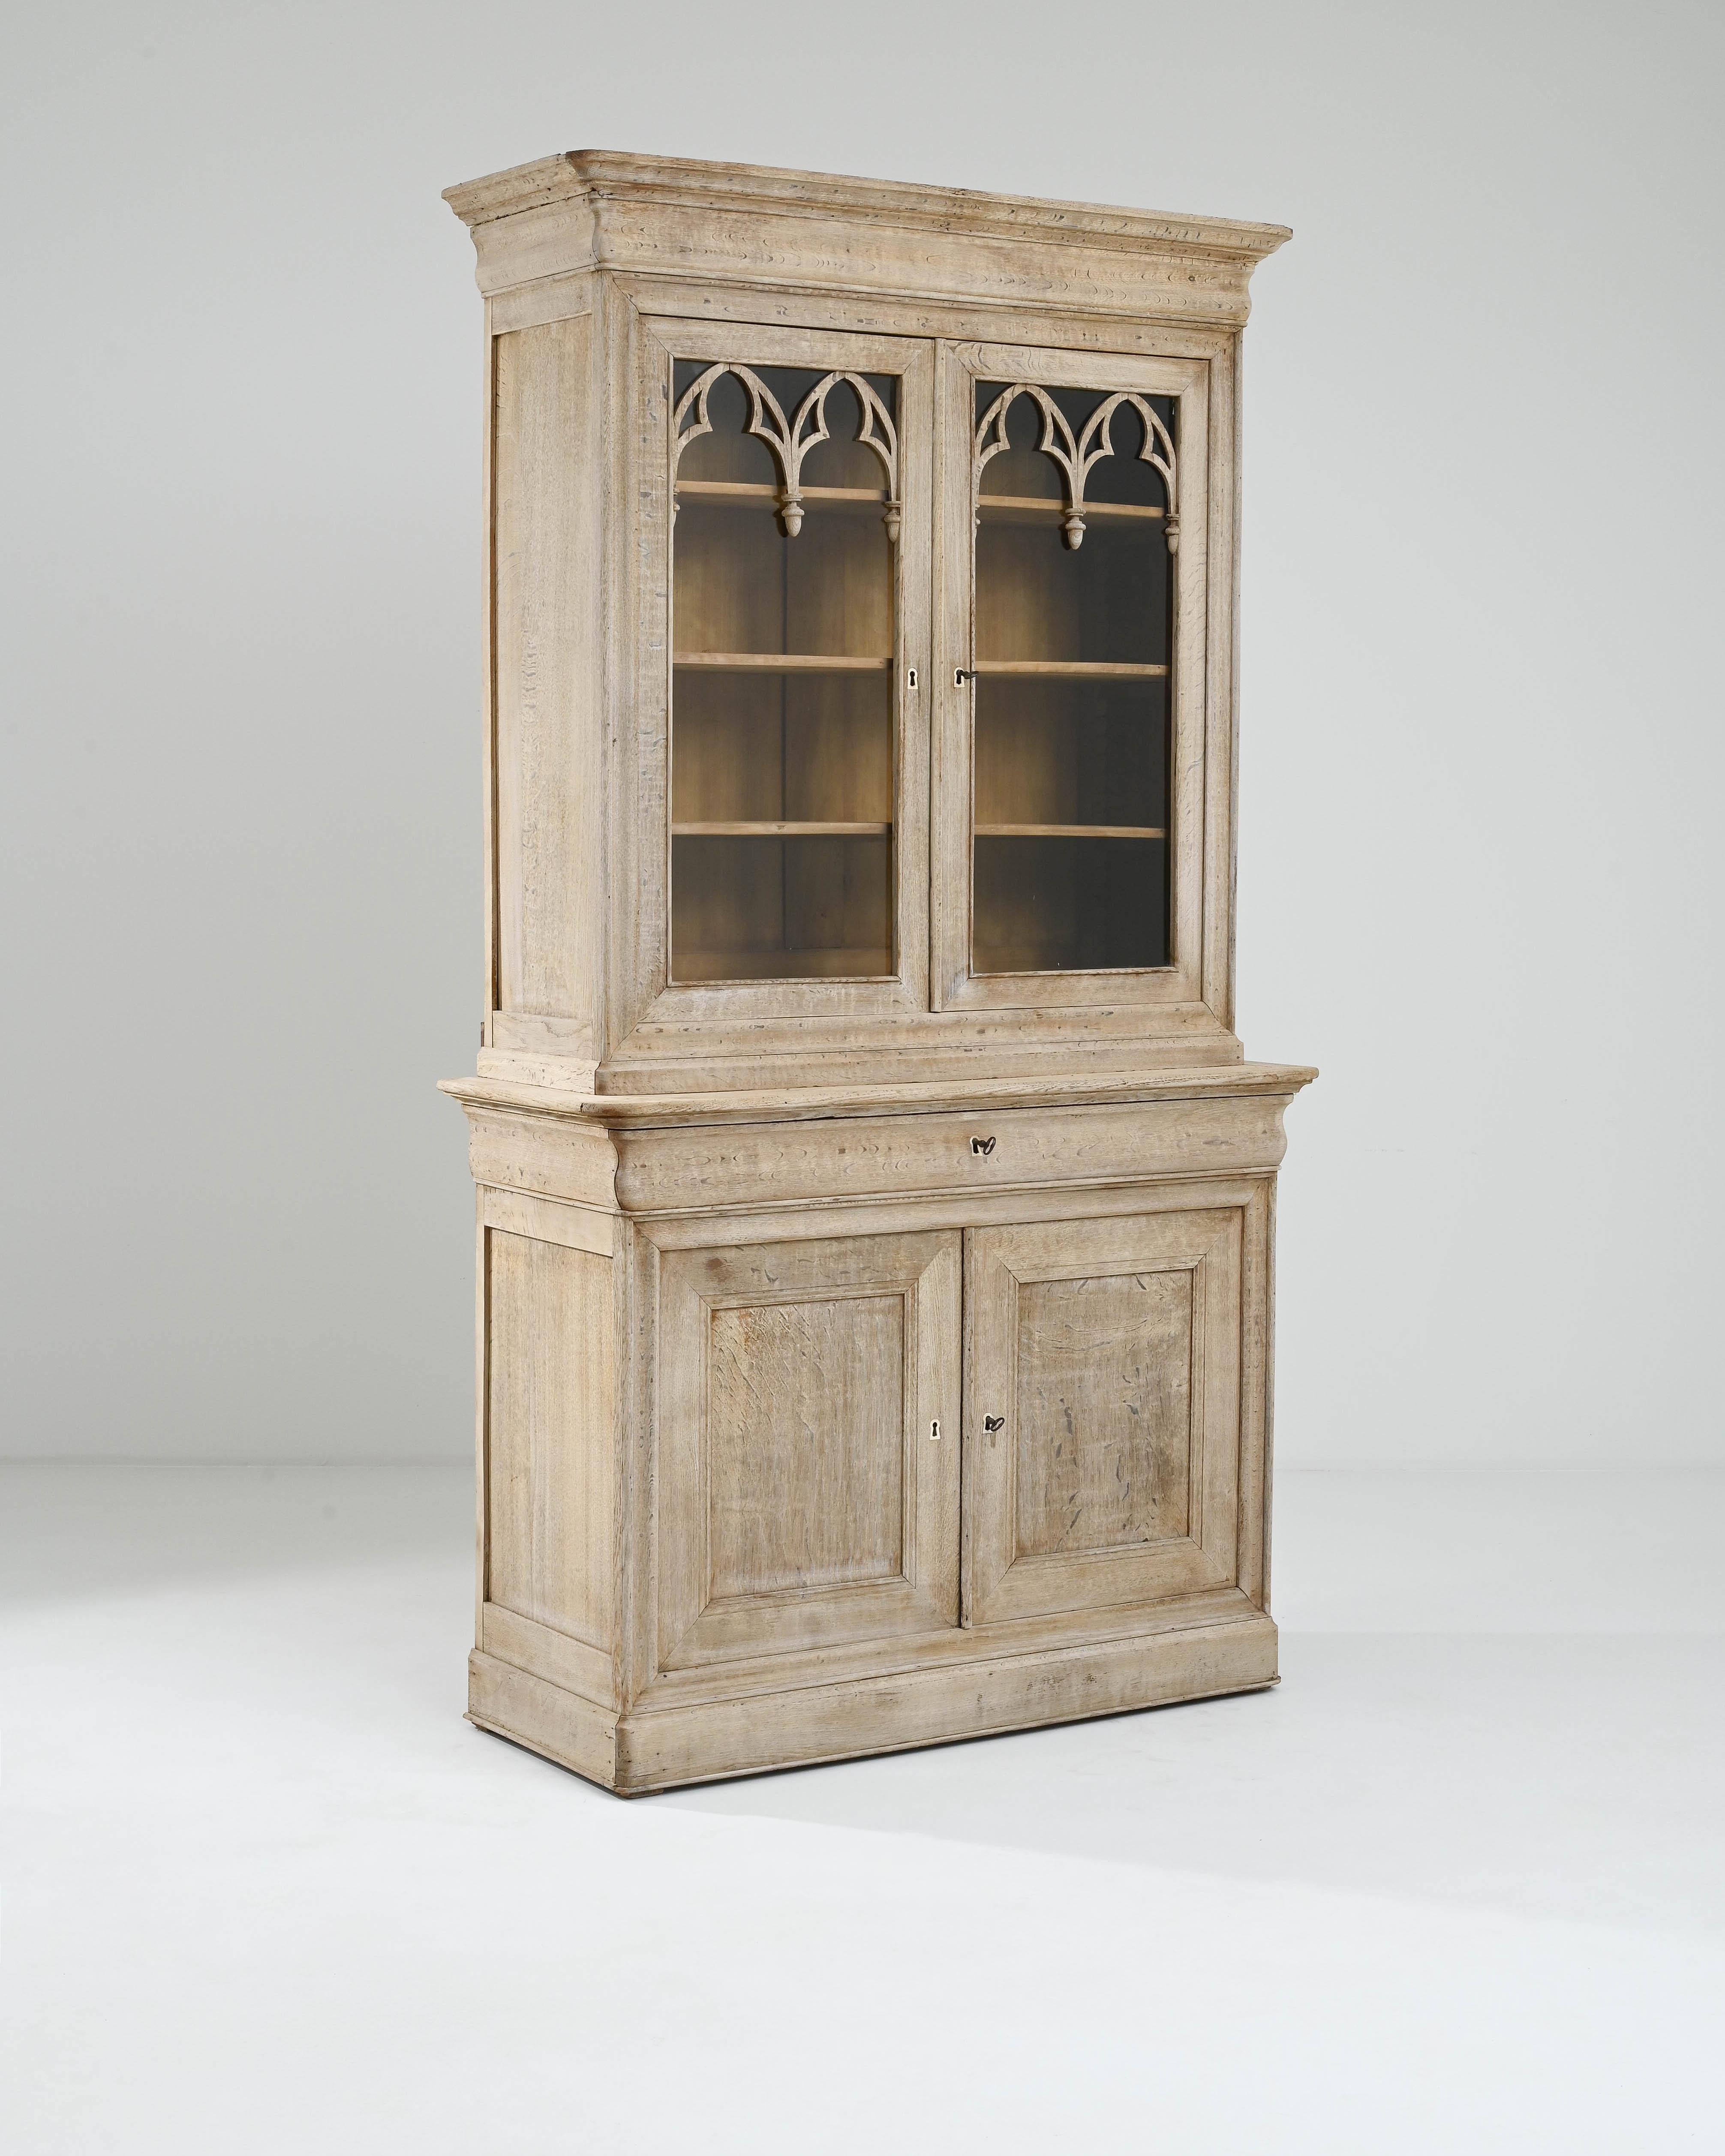 This delightful vitrine in natural oak would have originally been used to display the prized glass and chinaware of a Provincial household. Made in France in the 1800s, the elaborate wooden tracery which decorates the window panes evokes the